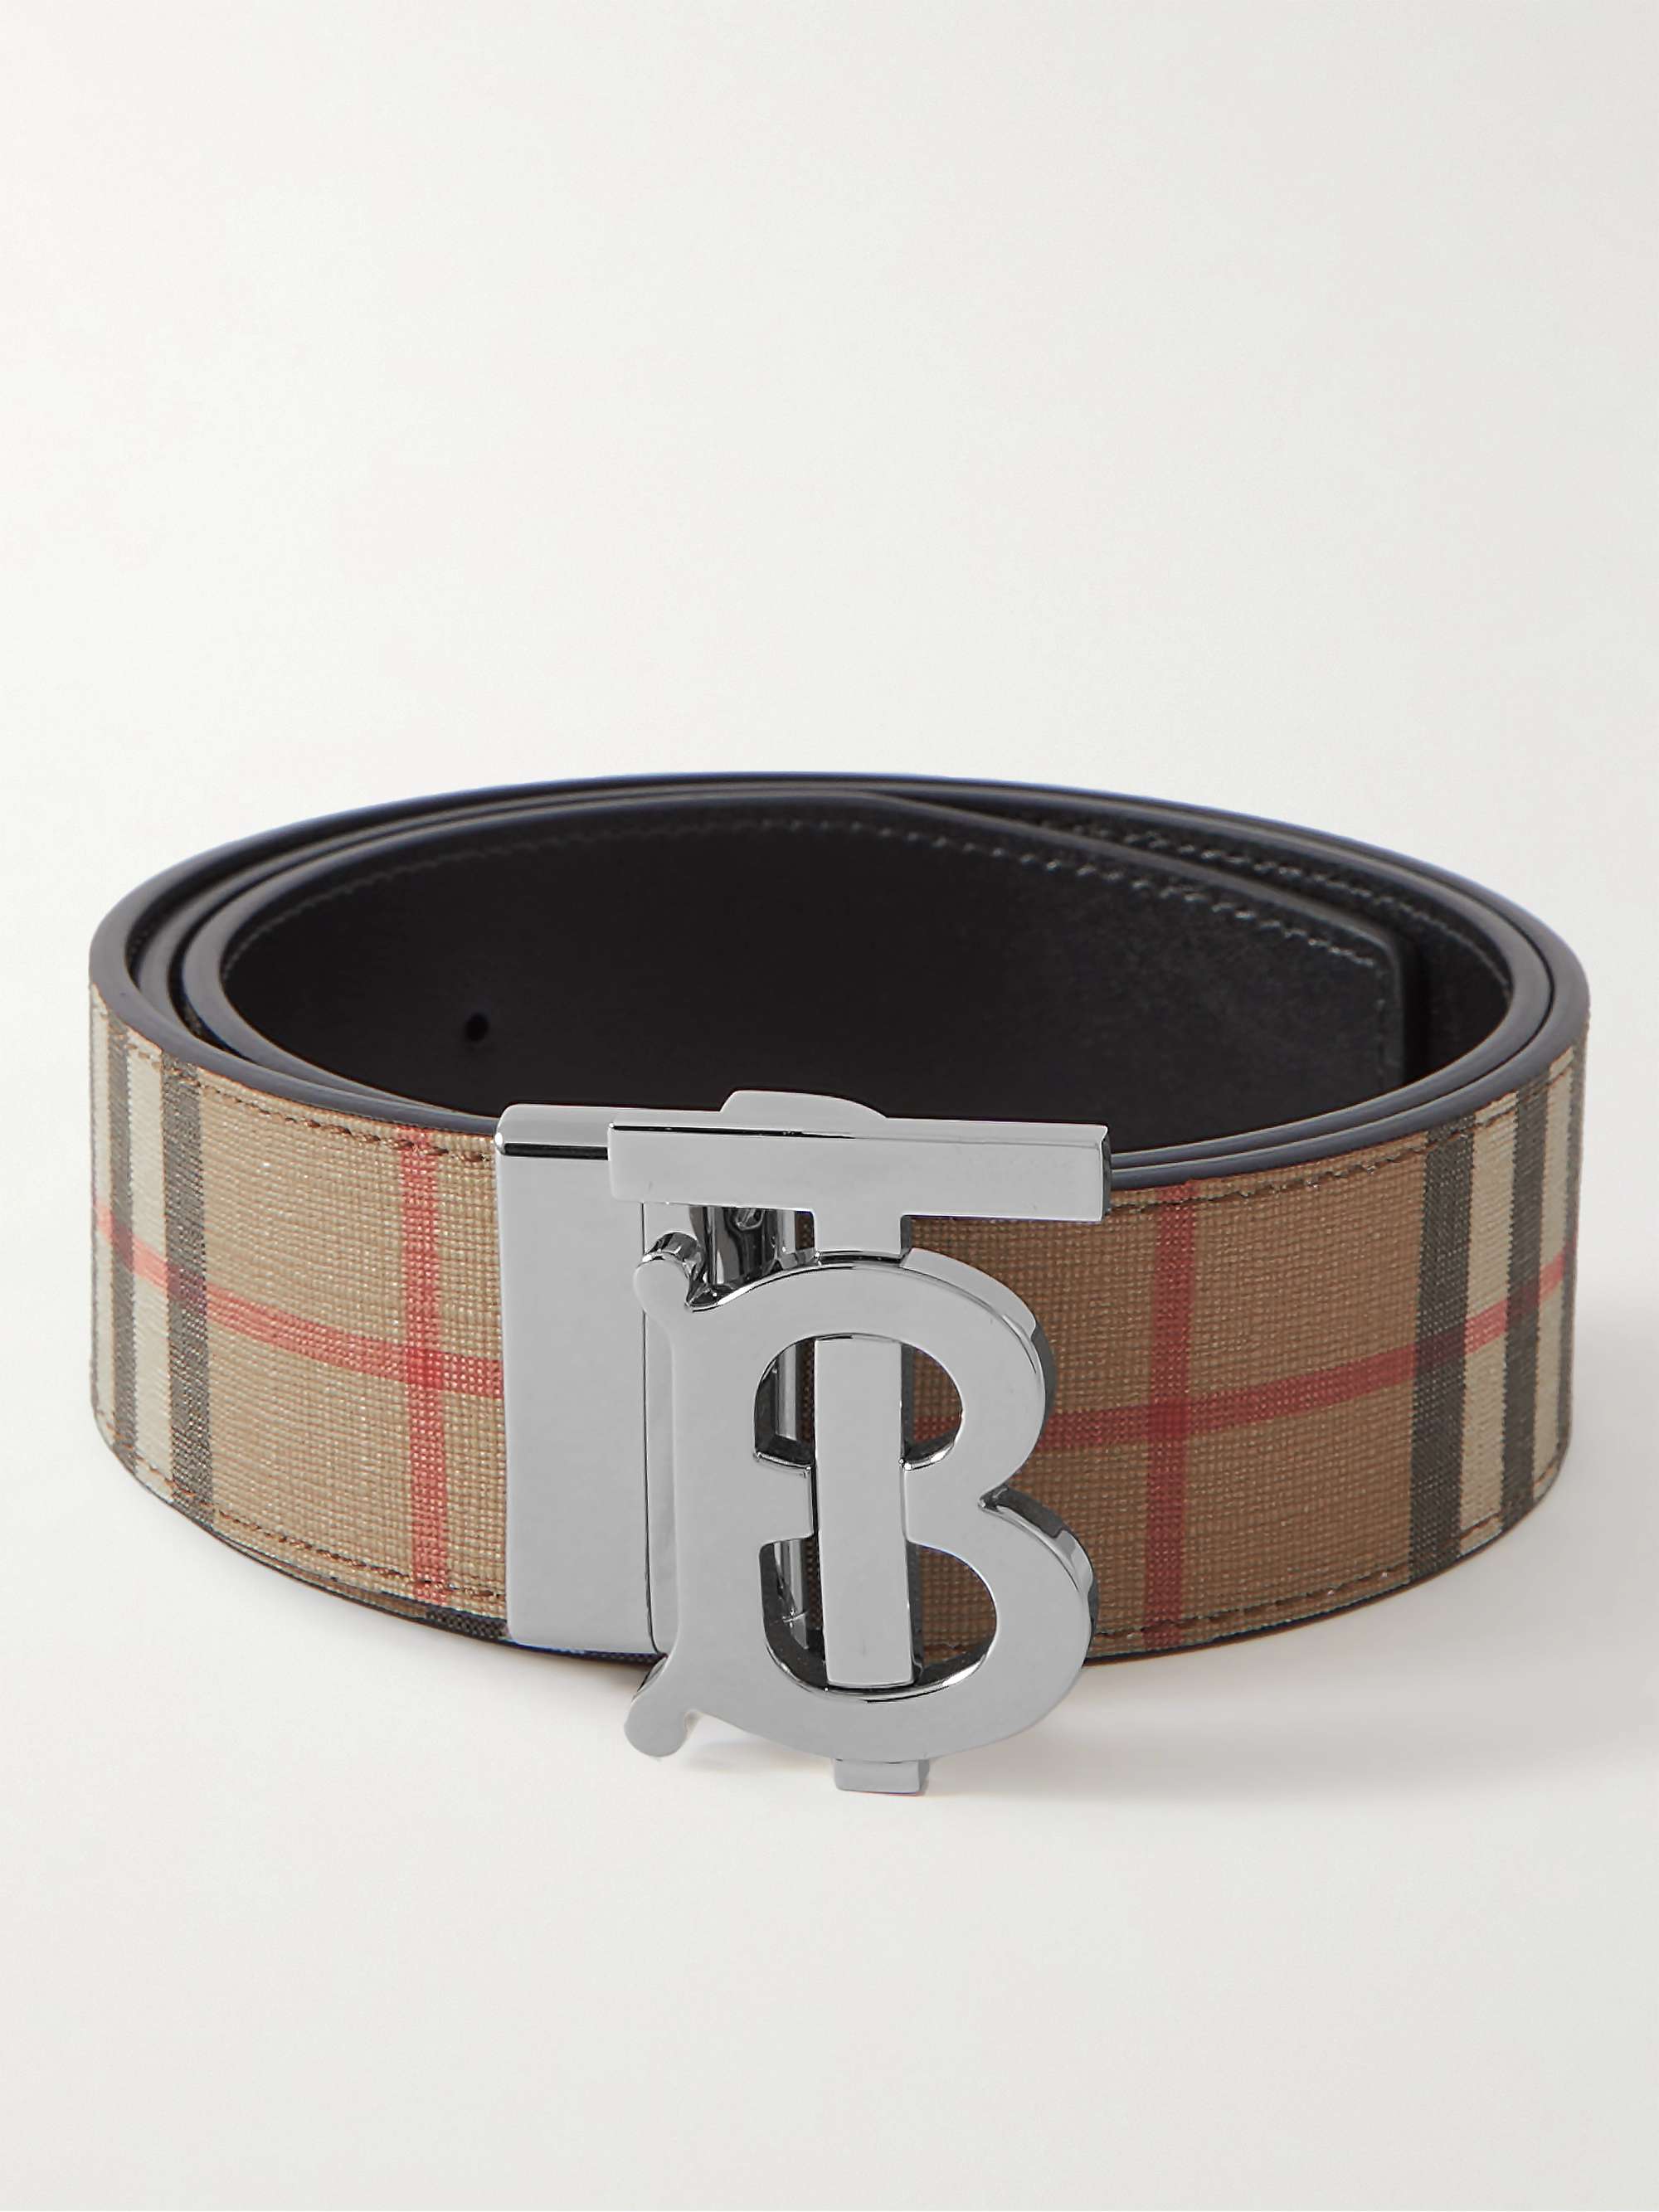 Canvas and Leather TB Belt in White/tan/gold - Women | Burberry® Official